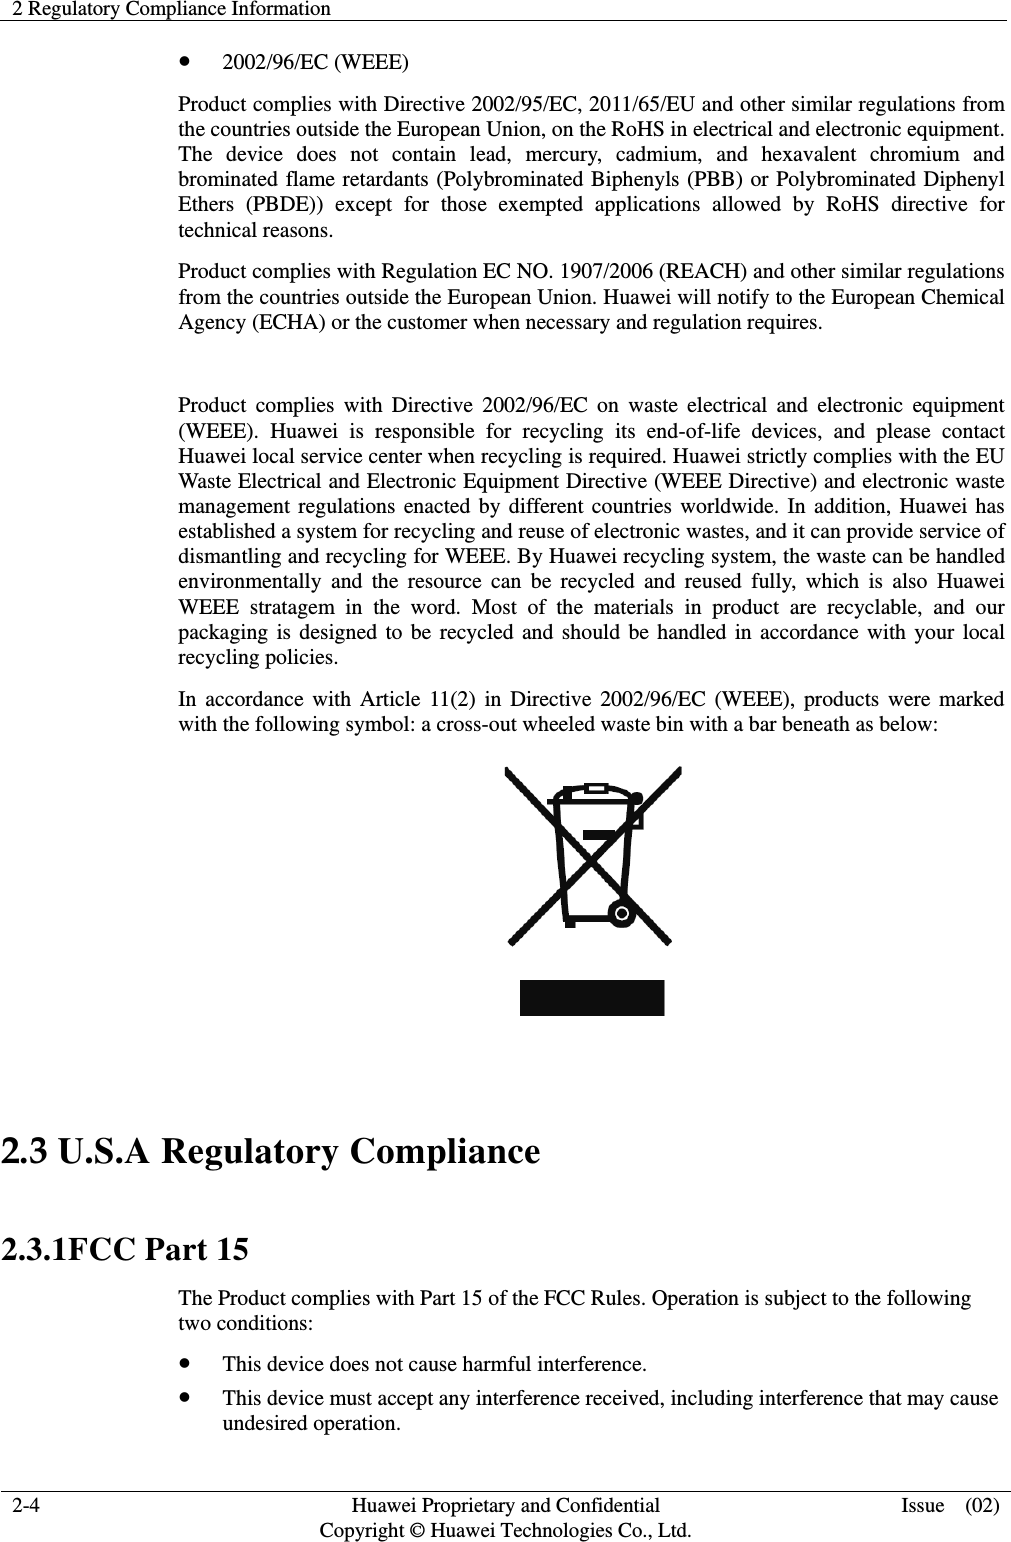 2 Regulatory Compliance Information    2-4 Huawei Proprietary and Confidential                                     Copyright © Huawei Technologies Co., Ltd. Issue    (02)   2002/96/EC (WEEE) Product complies with Directive 2002/95/EC, 2011/65/EU and other similar regulations from the countries outside the European Union, on the RoHS in electrical and electronic equipment. The  device  does  not  contain  lead,  mercury,  cadmium,  and  hexavalent  chromium  and brominated flame retardants (Polybrominated Biphenyls (PBB) or Polybrominated Diphenyl Ethers  (PBDE))  except  for  those  exempted  applications  allowed  by  RoHS  directive  for technical reasons.   Product complies with Regulation EC NO. 1907/2006 (REACH) and other similar regulations from the countries outside the European Union. Huawei will notify to the European Chemical Agency (ECHA) or the customer when necessary and regulation requires.  Product  complies  with  Directive  2002/96/EC  on  waste  electrical  and  electronic  equipment (WEEE).  Huawei  is  responsible  for  recycling  its  end-of-life  devices,  and  please  contact Huawei local service center when recycling is required. Huawei strictly complies with the EU Waste Electrical and Electronic Equipment Directive (WEEE Directive) and electronic waste management regulations enacted by different countries worldwide. In addition, Huawei has established a system for recycling and reuse of electronic wastes, and it can provide service of dismantling and recycling for WEEE. By Huawei recycling system, the waste can be handled environmentally  and  the  resource  can  be  recycled  and  reused  fully,  which  is  also  Huawei WEEE  stratagem  in  the  word.  Most  of  the  materials  in  product  are  recyclable,  and  our packaging is designed to be recycled and should be handled in accordance with your local recycling policies.   In accordance  with  Article 11(2) in  Directive 2002/96/EC  (WEEE),  products were marked with the following symbol: a cross-out wheeled waste bin with a bar beneath as below:   2.3 U.S.A Regulatory Compliance    2.3.1FCC Part 15 The Product complies with Part 15 of the FCC Rules. Operation is subject to the following two conditions:  This device does not cause harmful interference.  This device must accept any interference received, including interference that may cause undesired operation. 